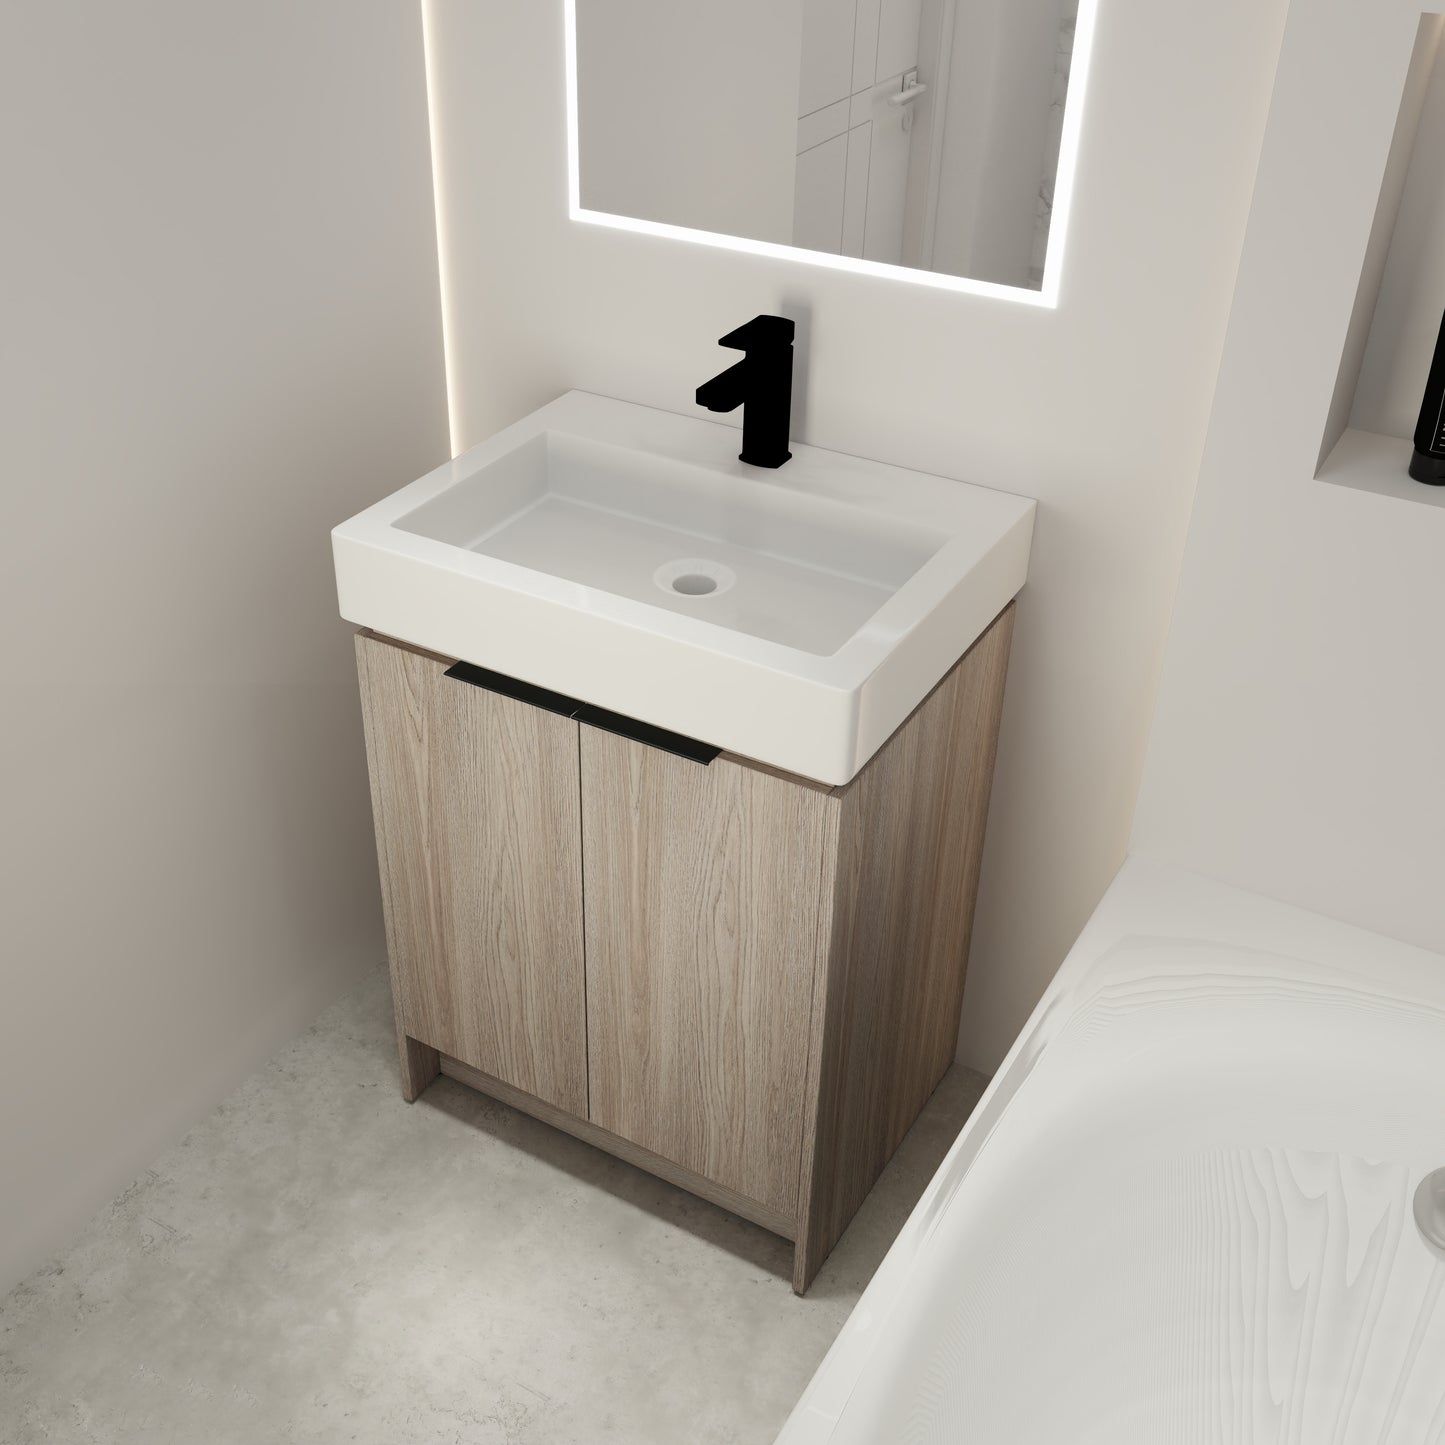 24 Inch Bathroom Vanity With Ceramic Basin  （KD-Packing）